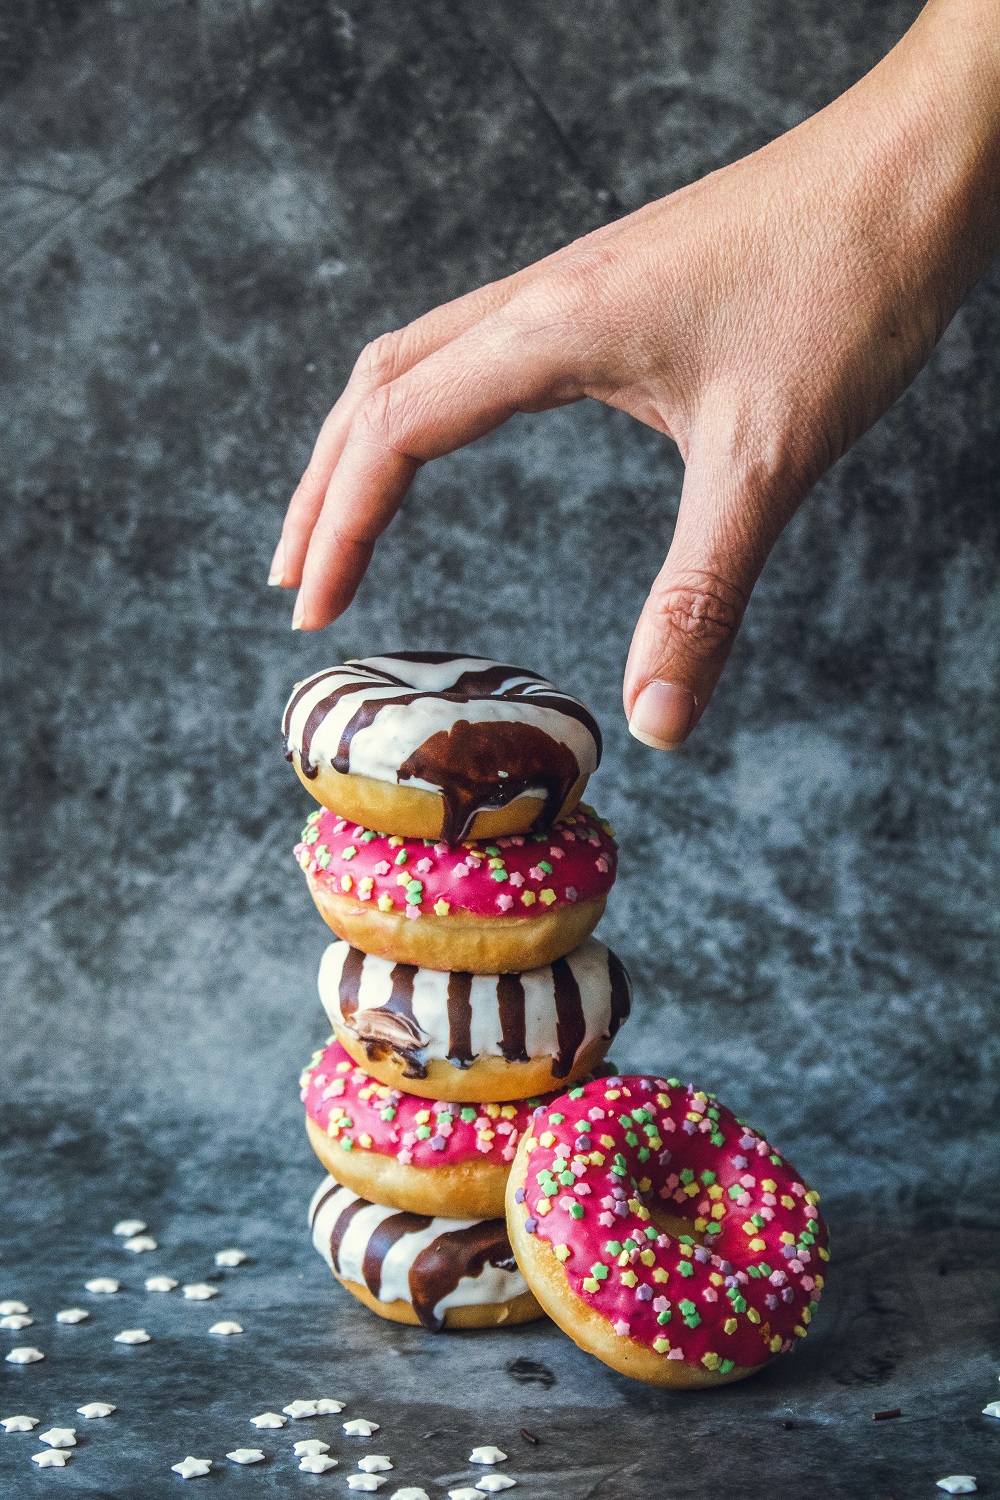 A stack of doughnuts with a hand reaching for them